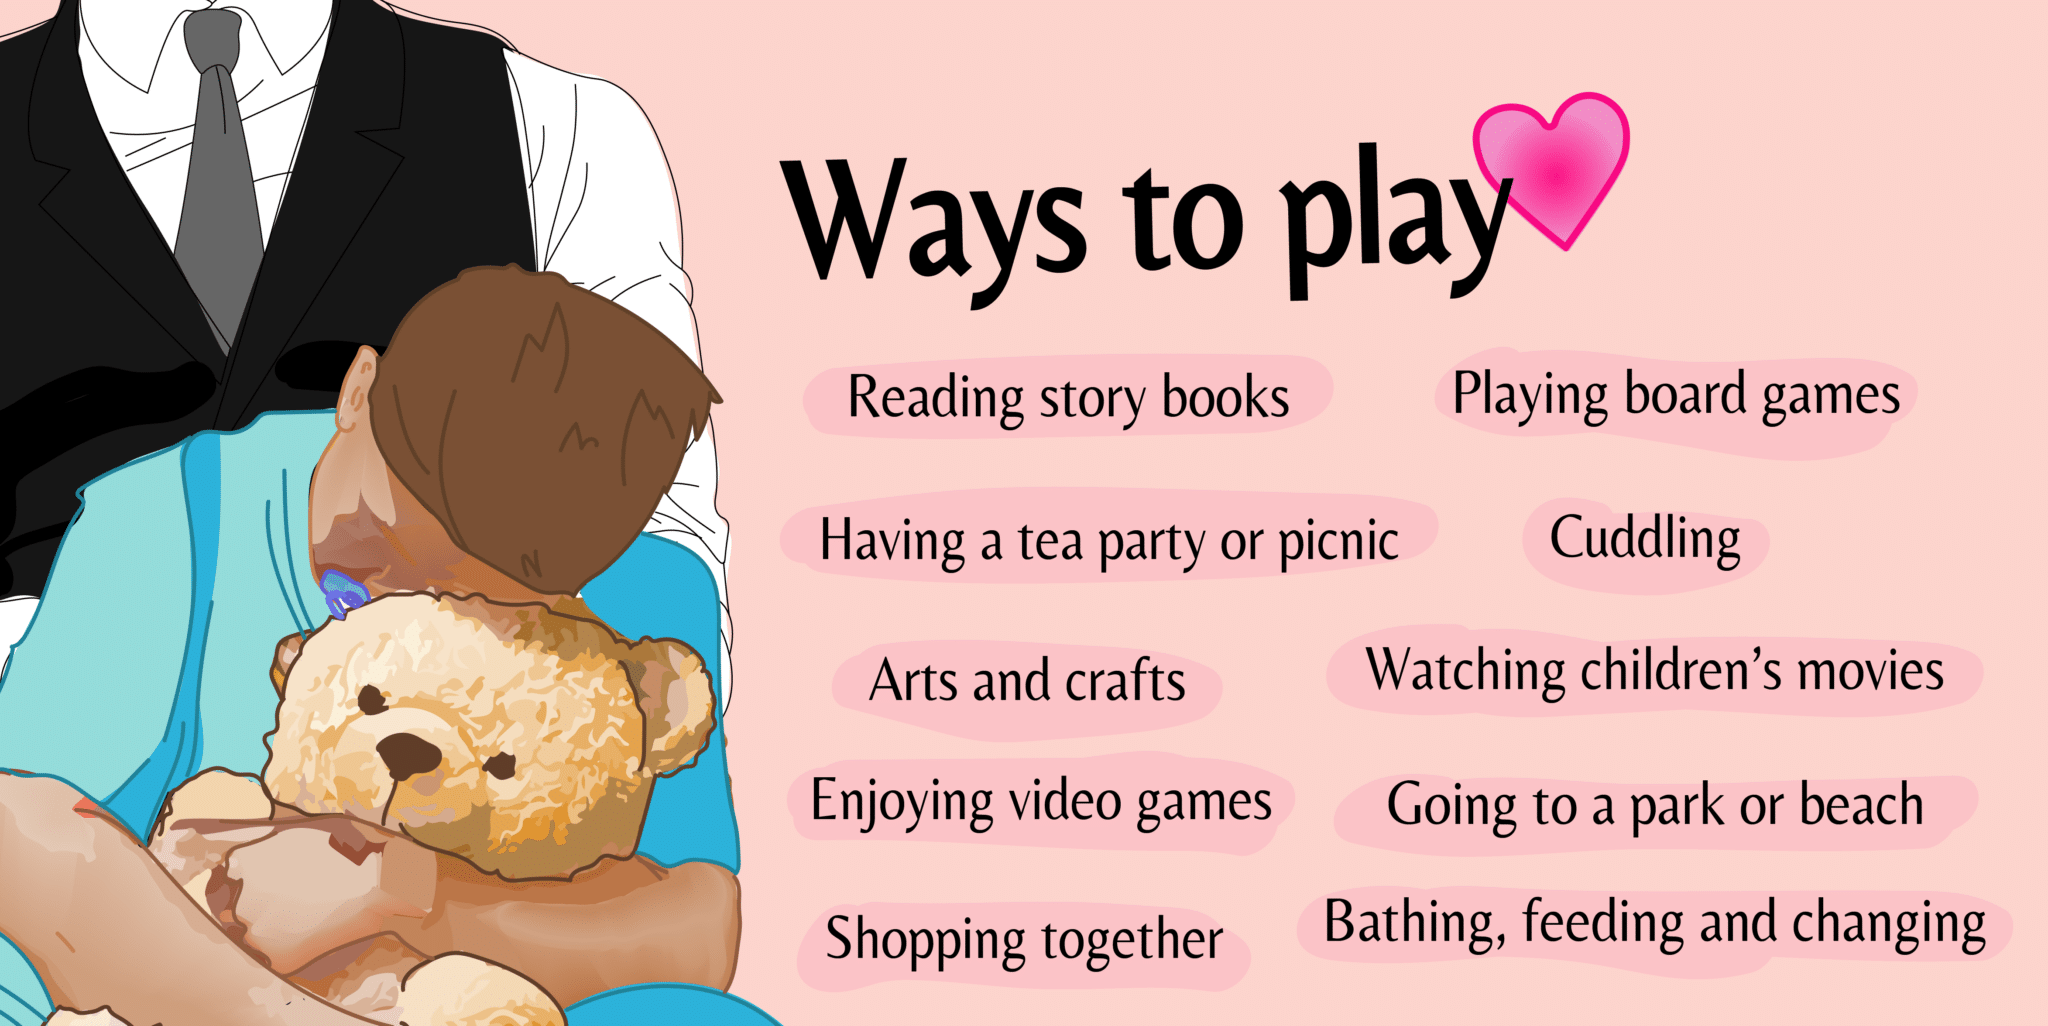 DDLG ways to play activities